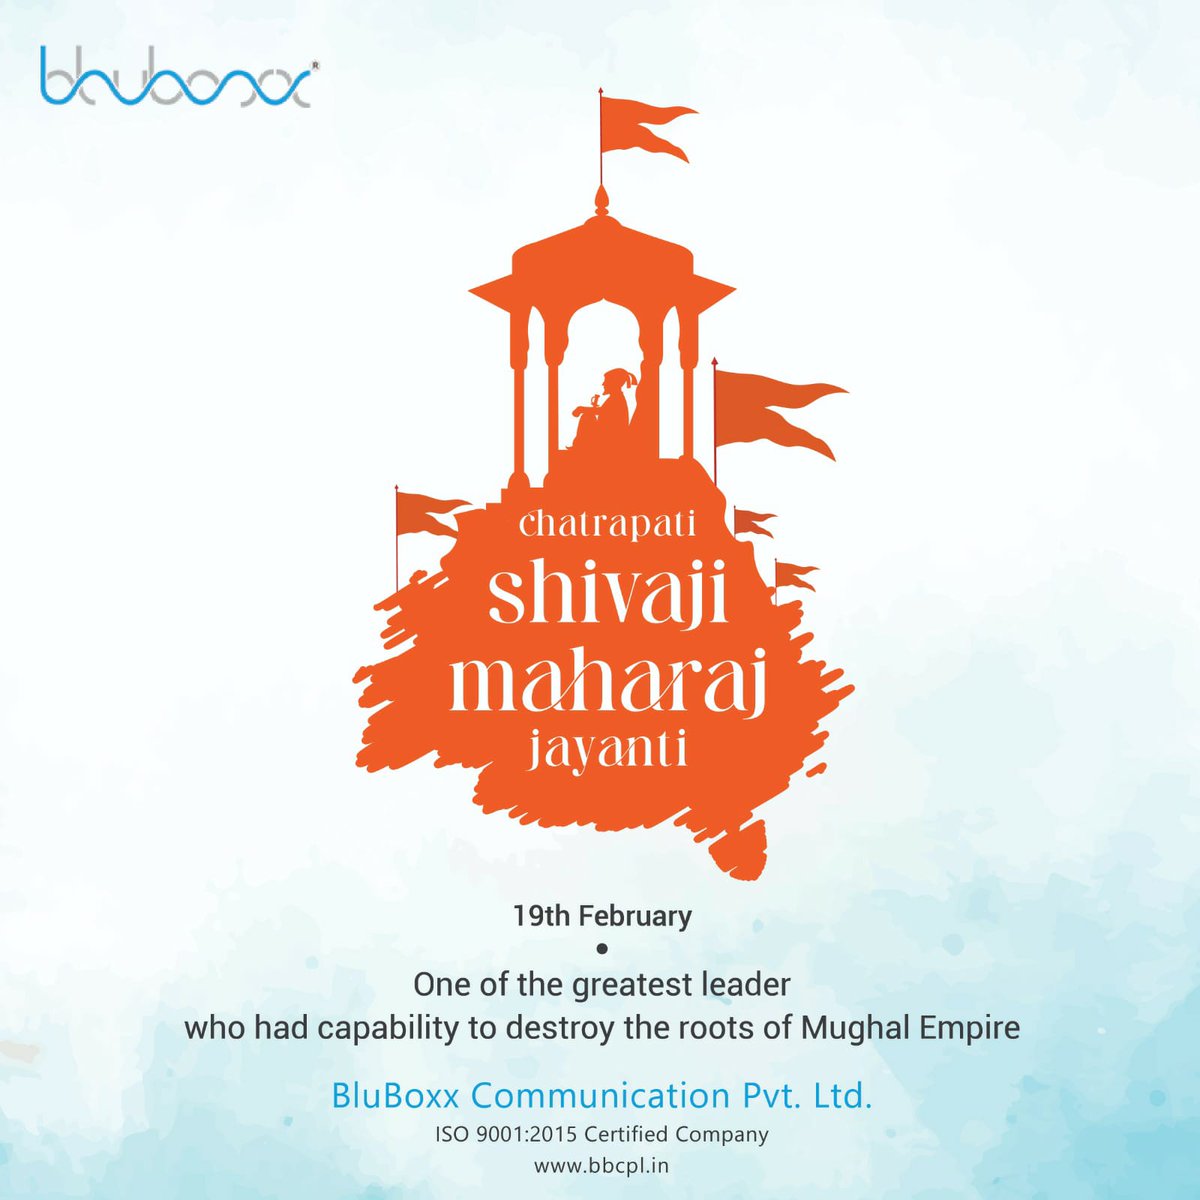 'If we can take inspiration from the life of Chatrapati Shivaji Maharaj, then it will be the best thing we can do for our lives.'

#shivjayanti #chtrapatishivajimaharaj  #warrior #fatherofindiannavy #19february  #bluboxx #bluboxxcommunicationpvtltd